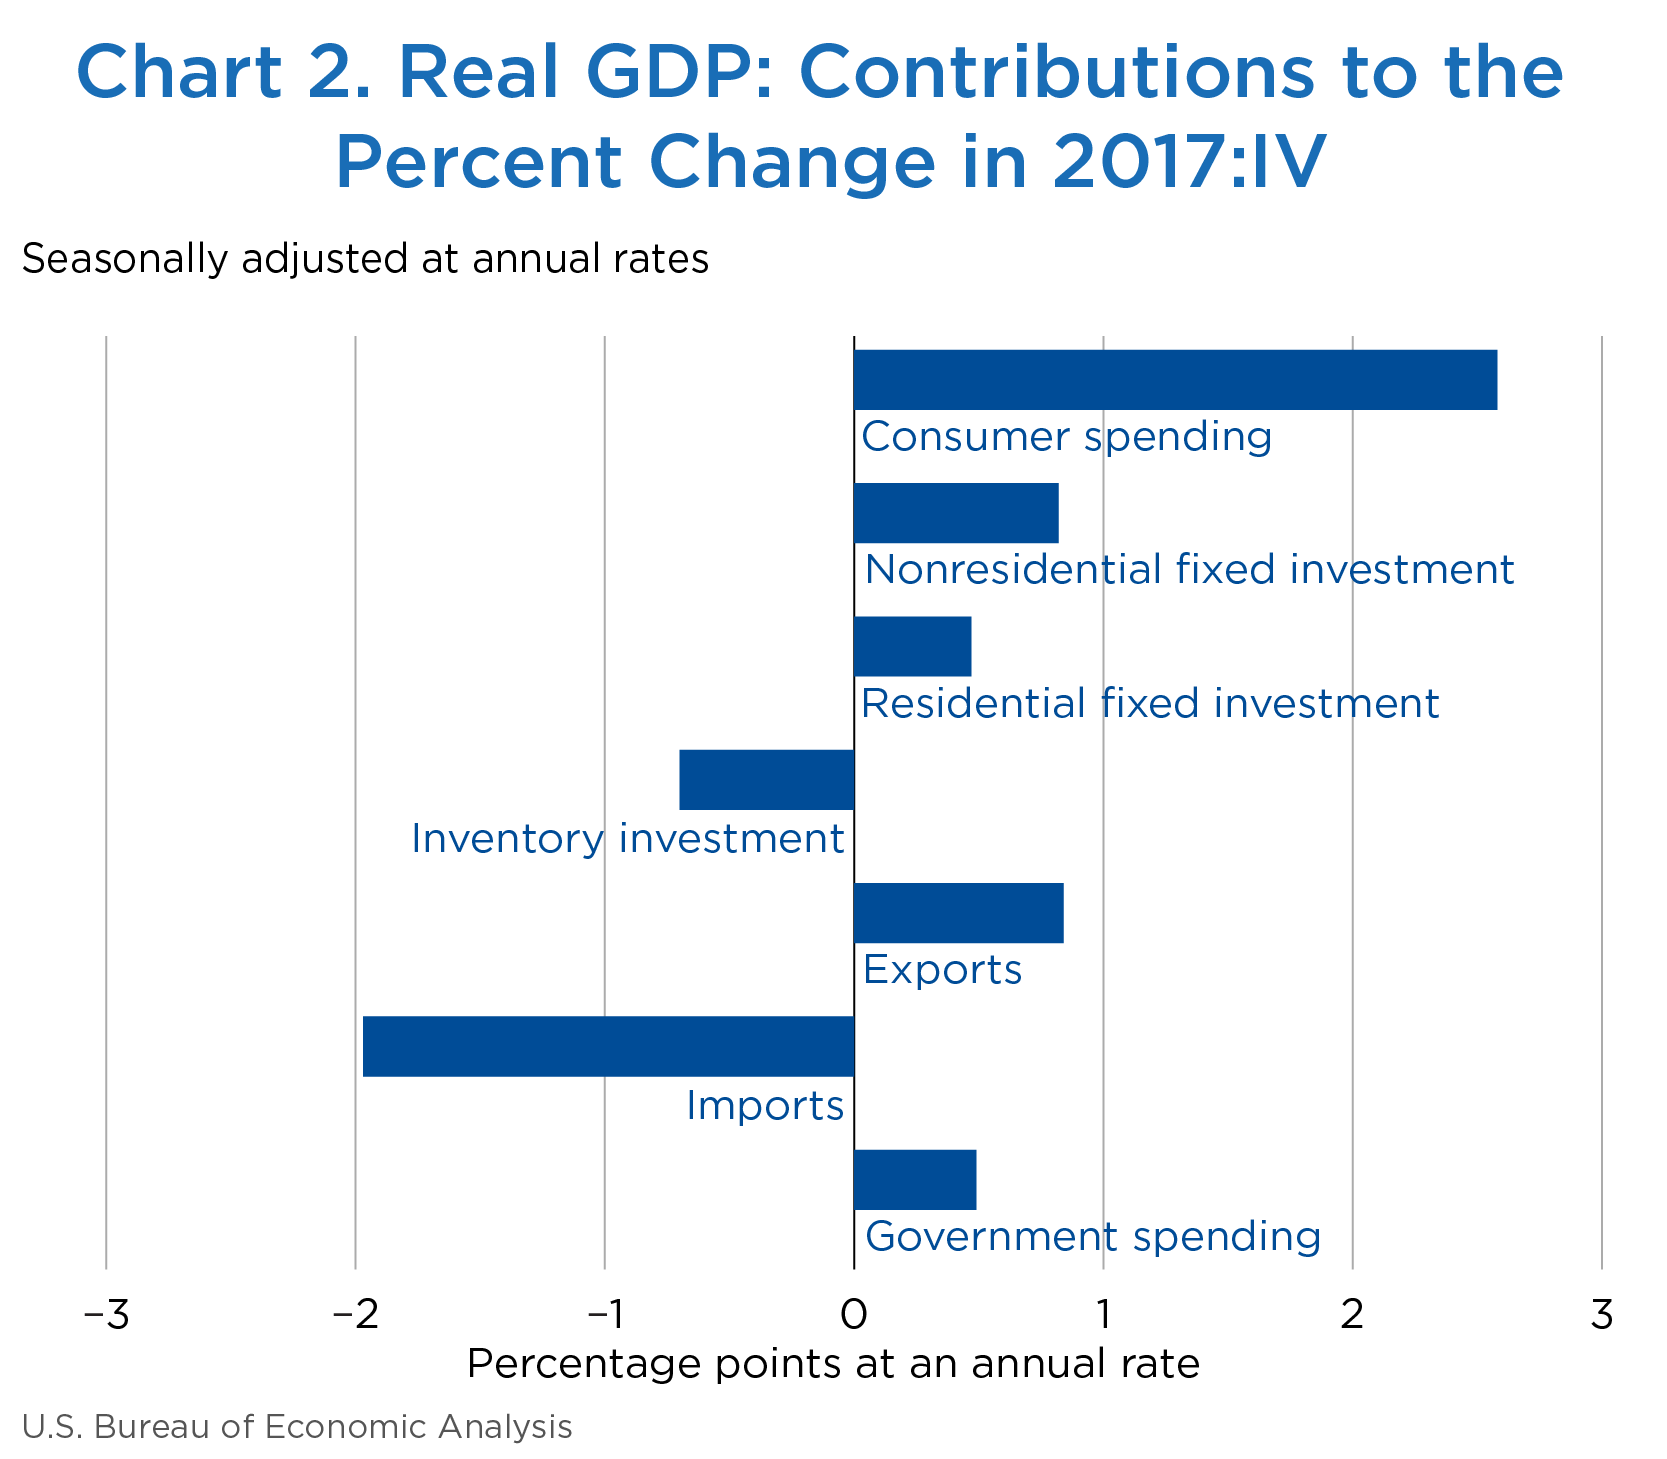 Chart 2. Real GDP: Contributions to the Percent Change in 2017:IV, Bar Chart